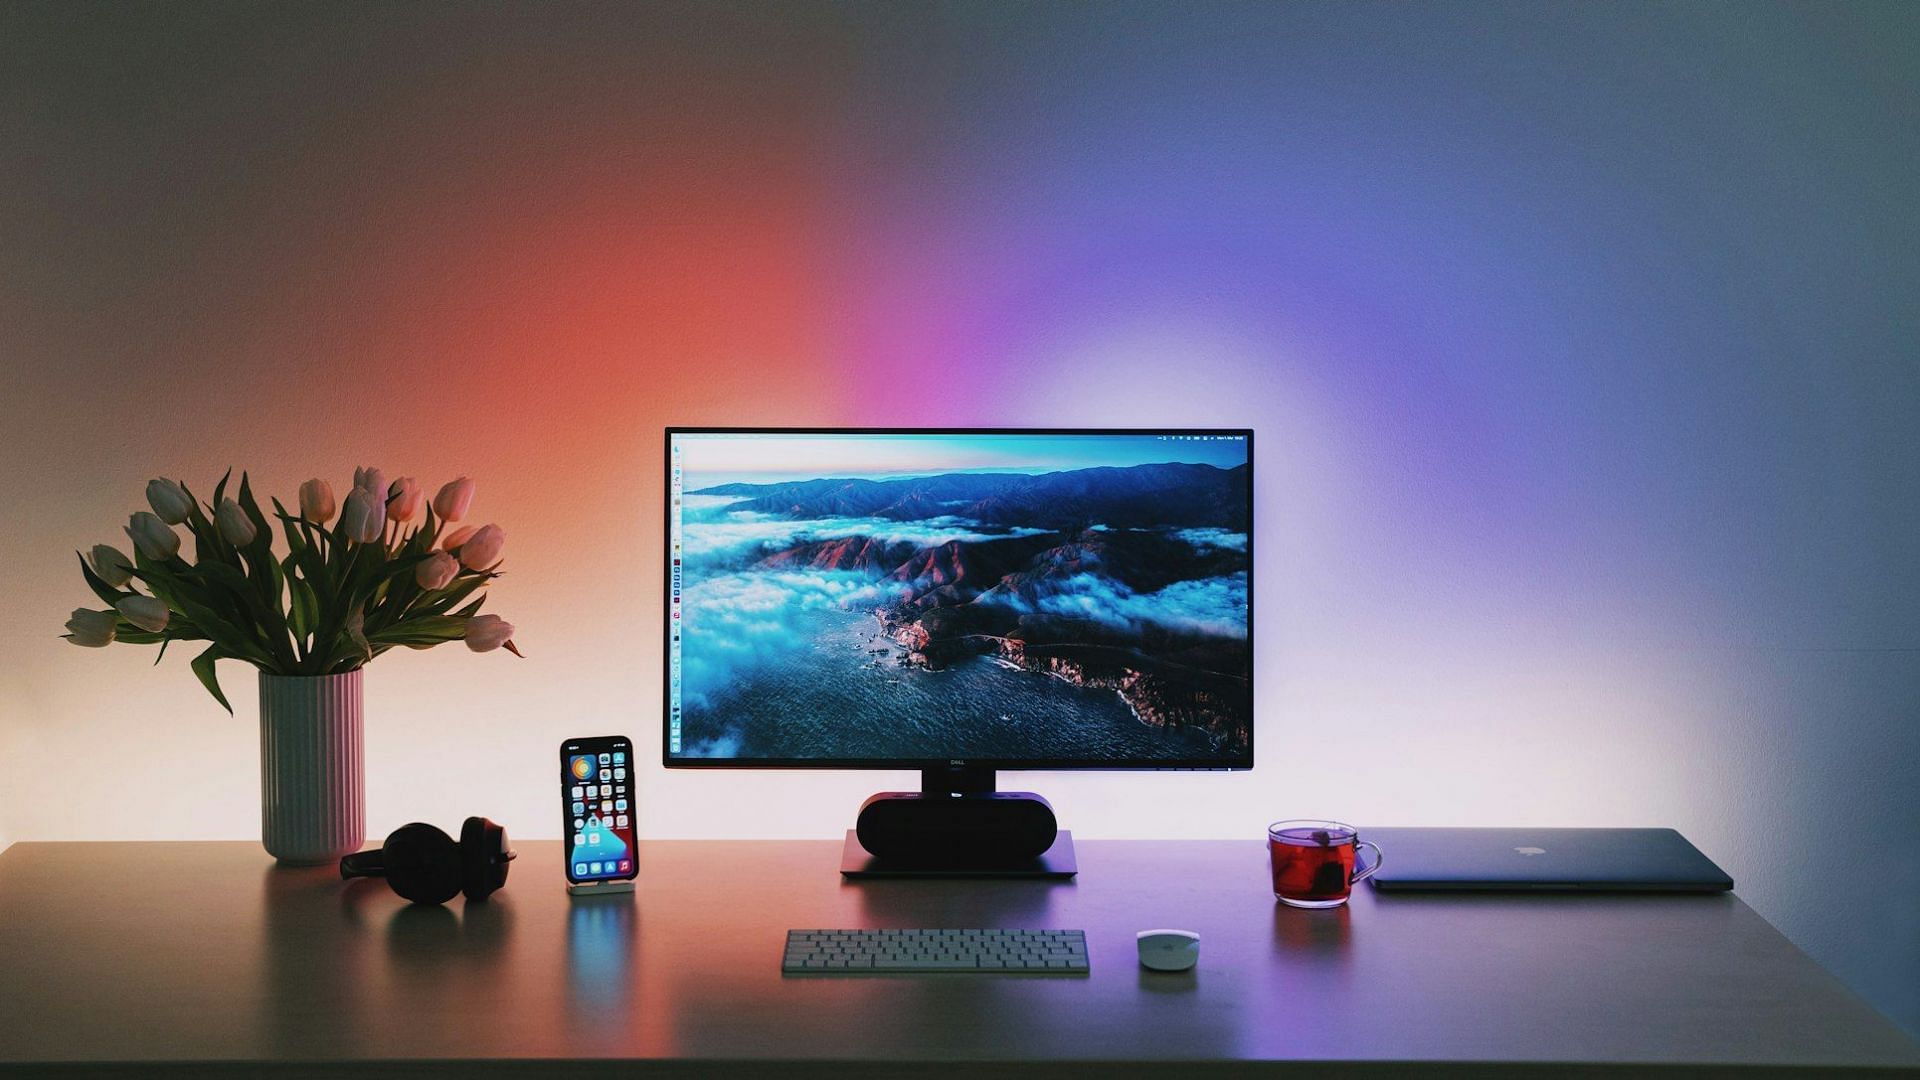 A step-by-step guide to making your own custom wallpaper for Windows (Image via Unsplash/@linusmimietz)